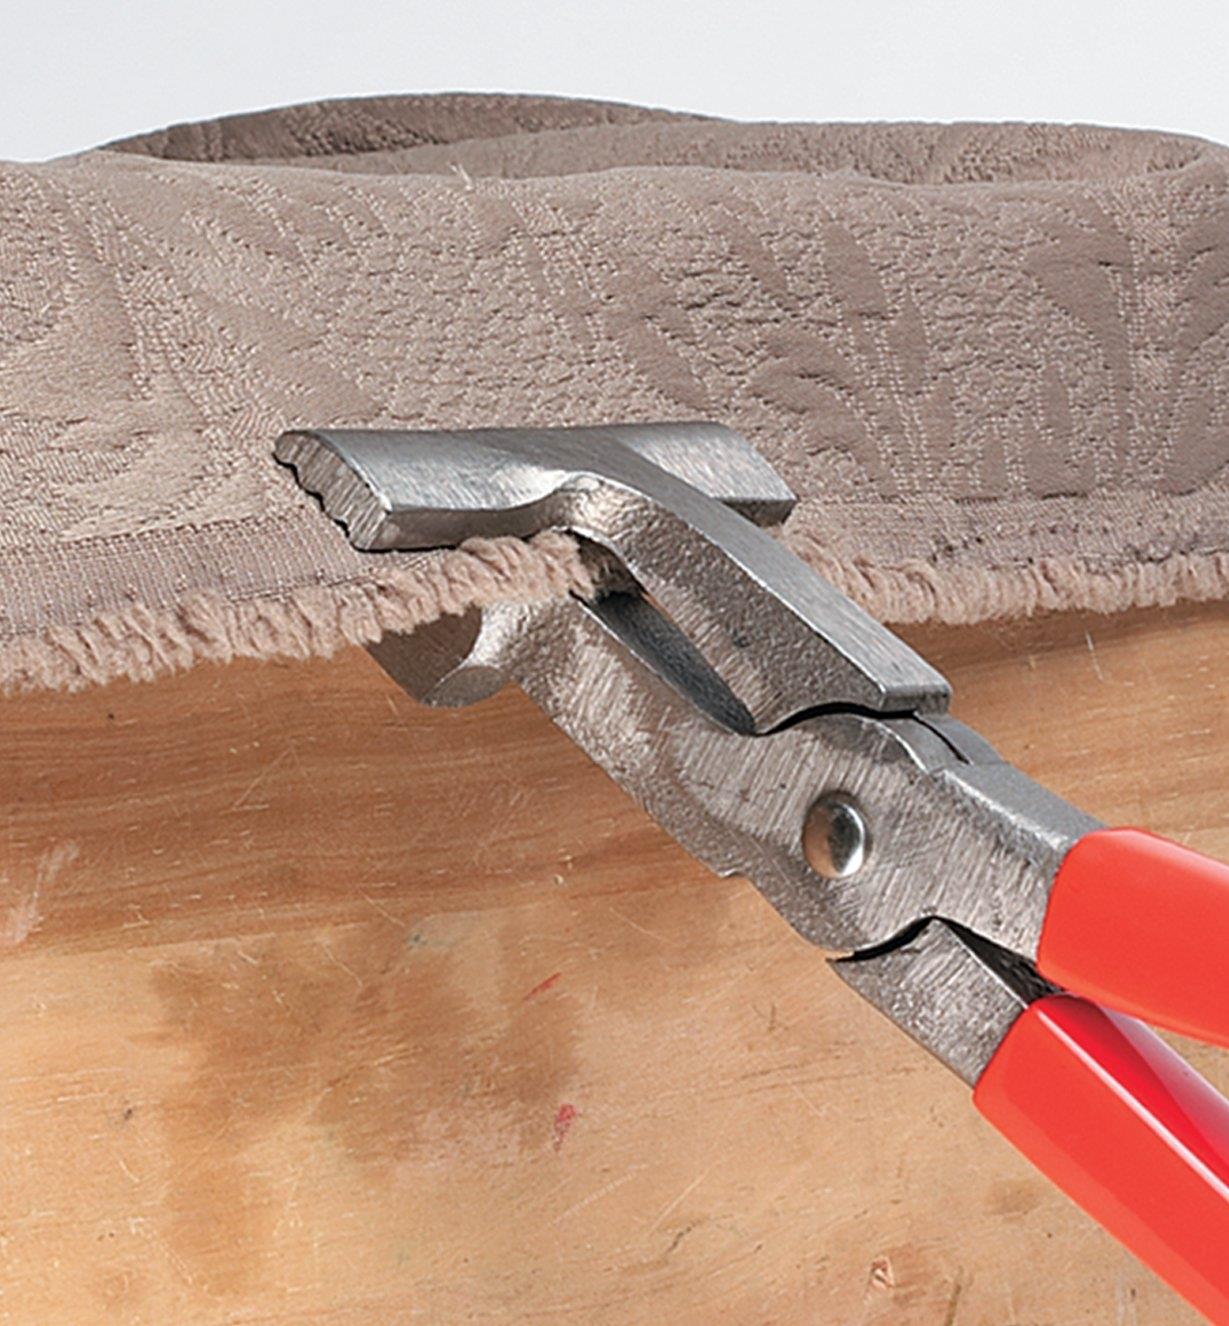 Upholsterer's Pliers holding the edge of upholstery fabric